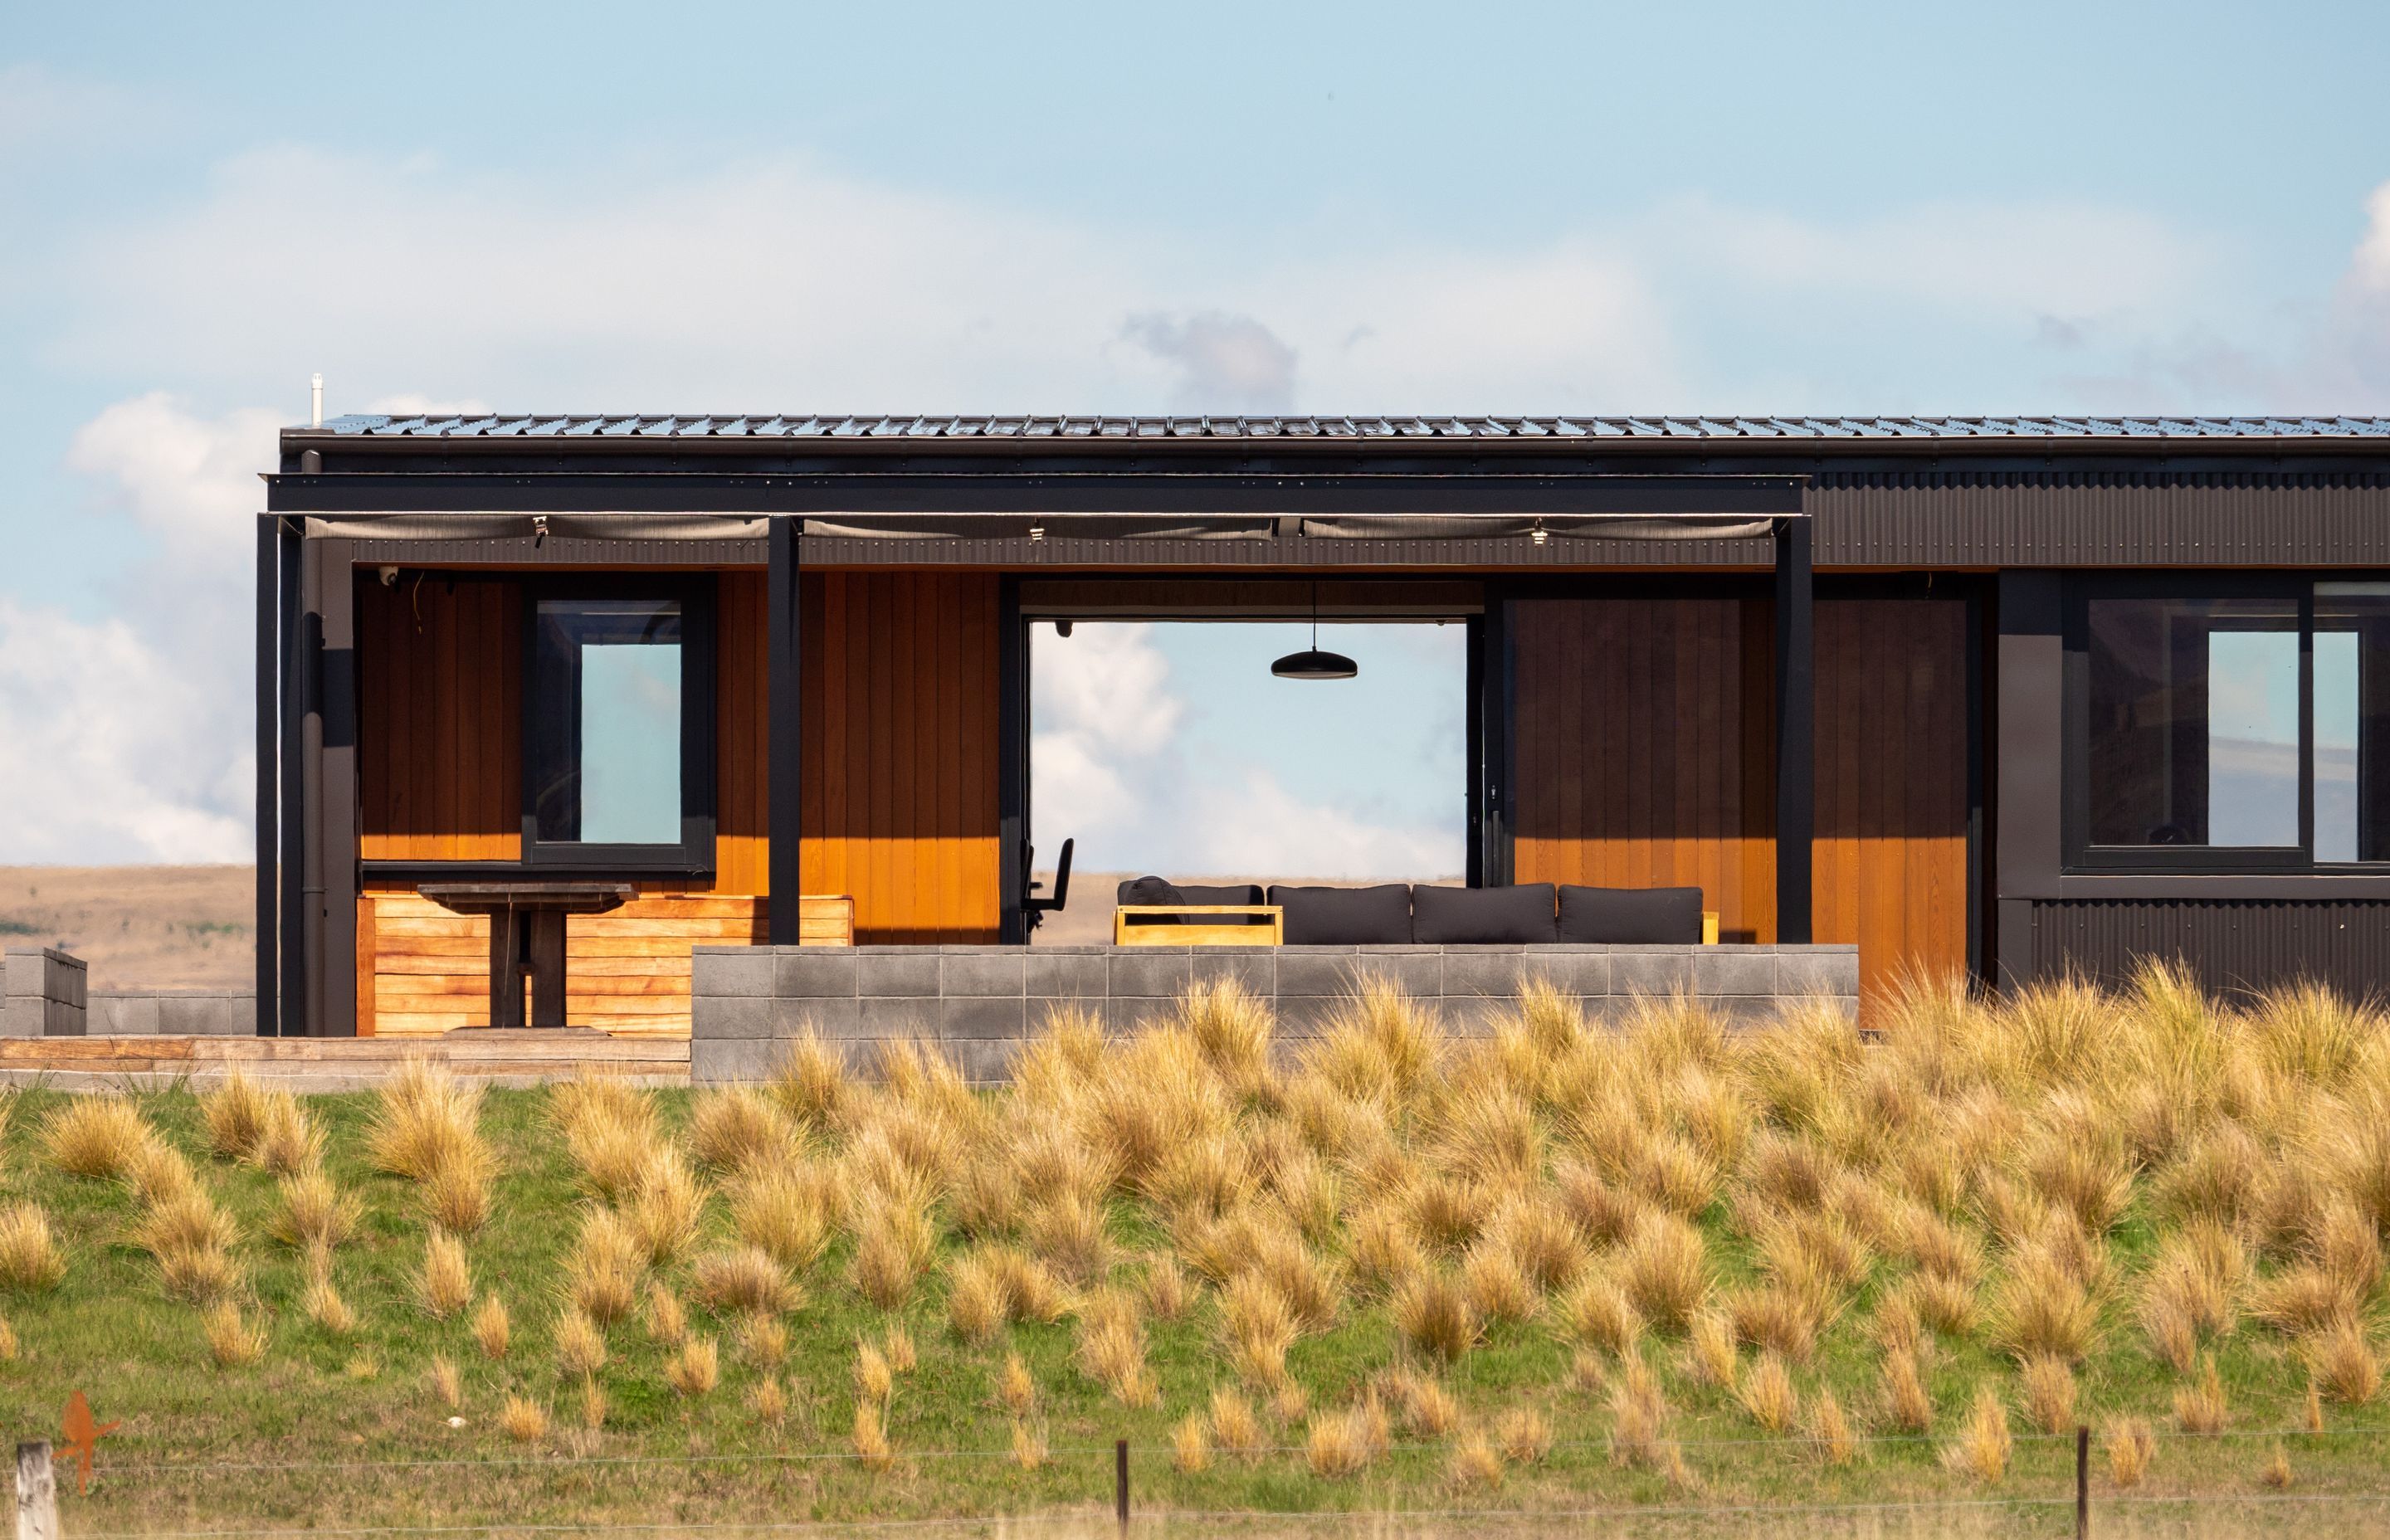 The holiday home near Twizel. “We have designed for high wind zones,” says Beth Chaney-Walker of Chaney &amp; Norman Architects in Wanaka, “but this was off the charts. A lot of the elements are specifically engineered so it was really nice to see the end result. It’s really robust.”